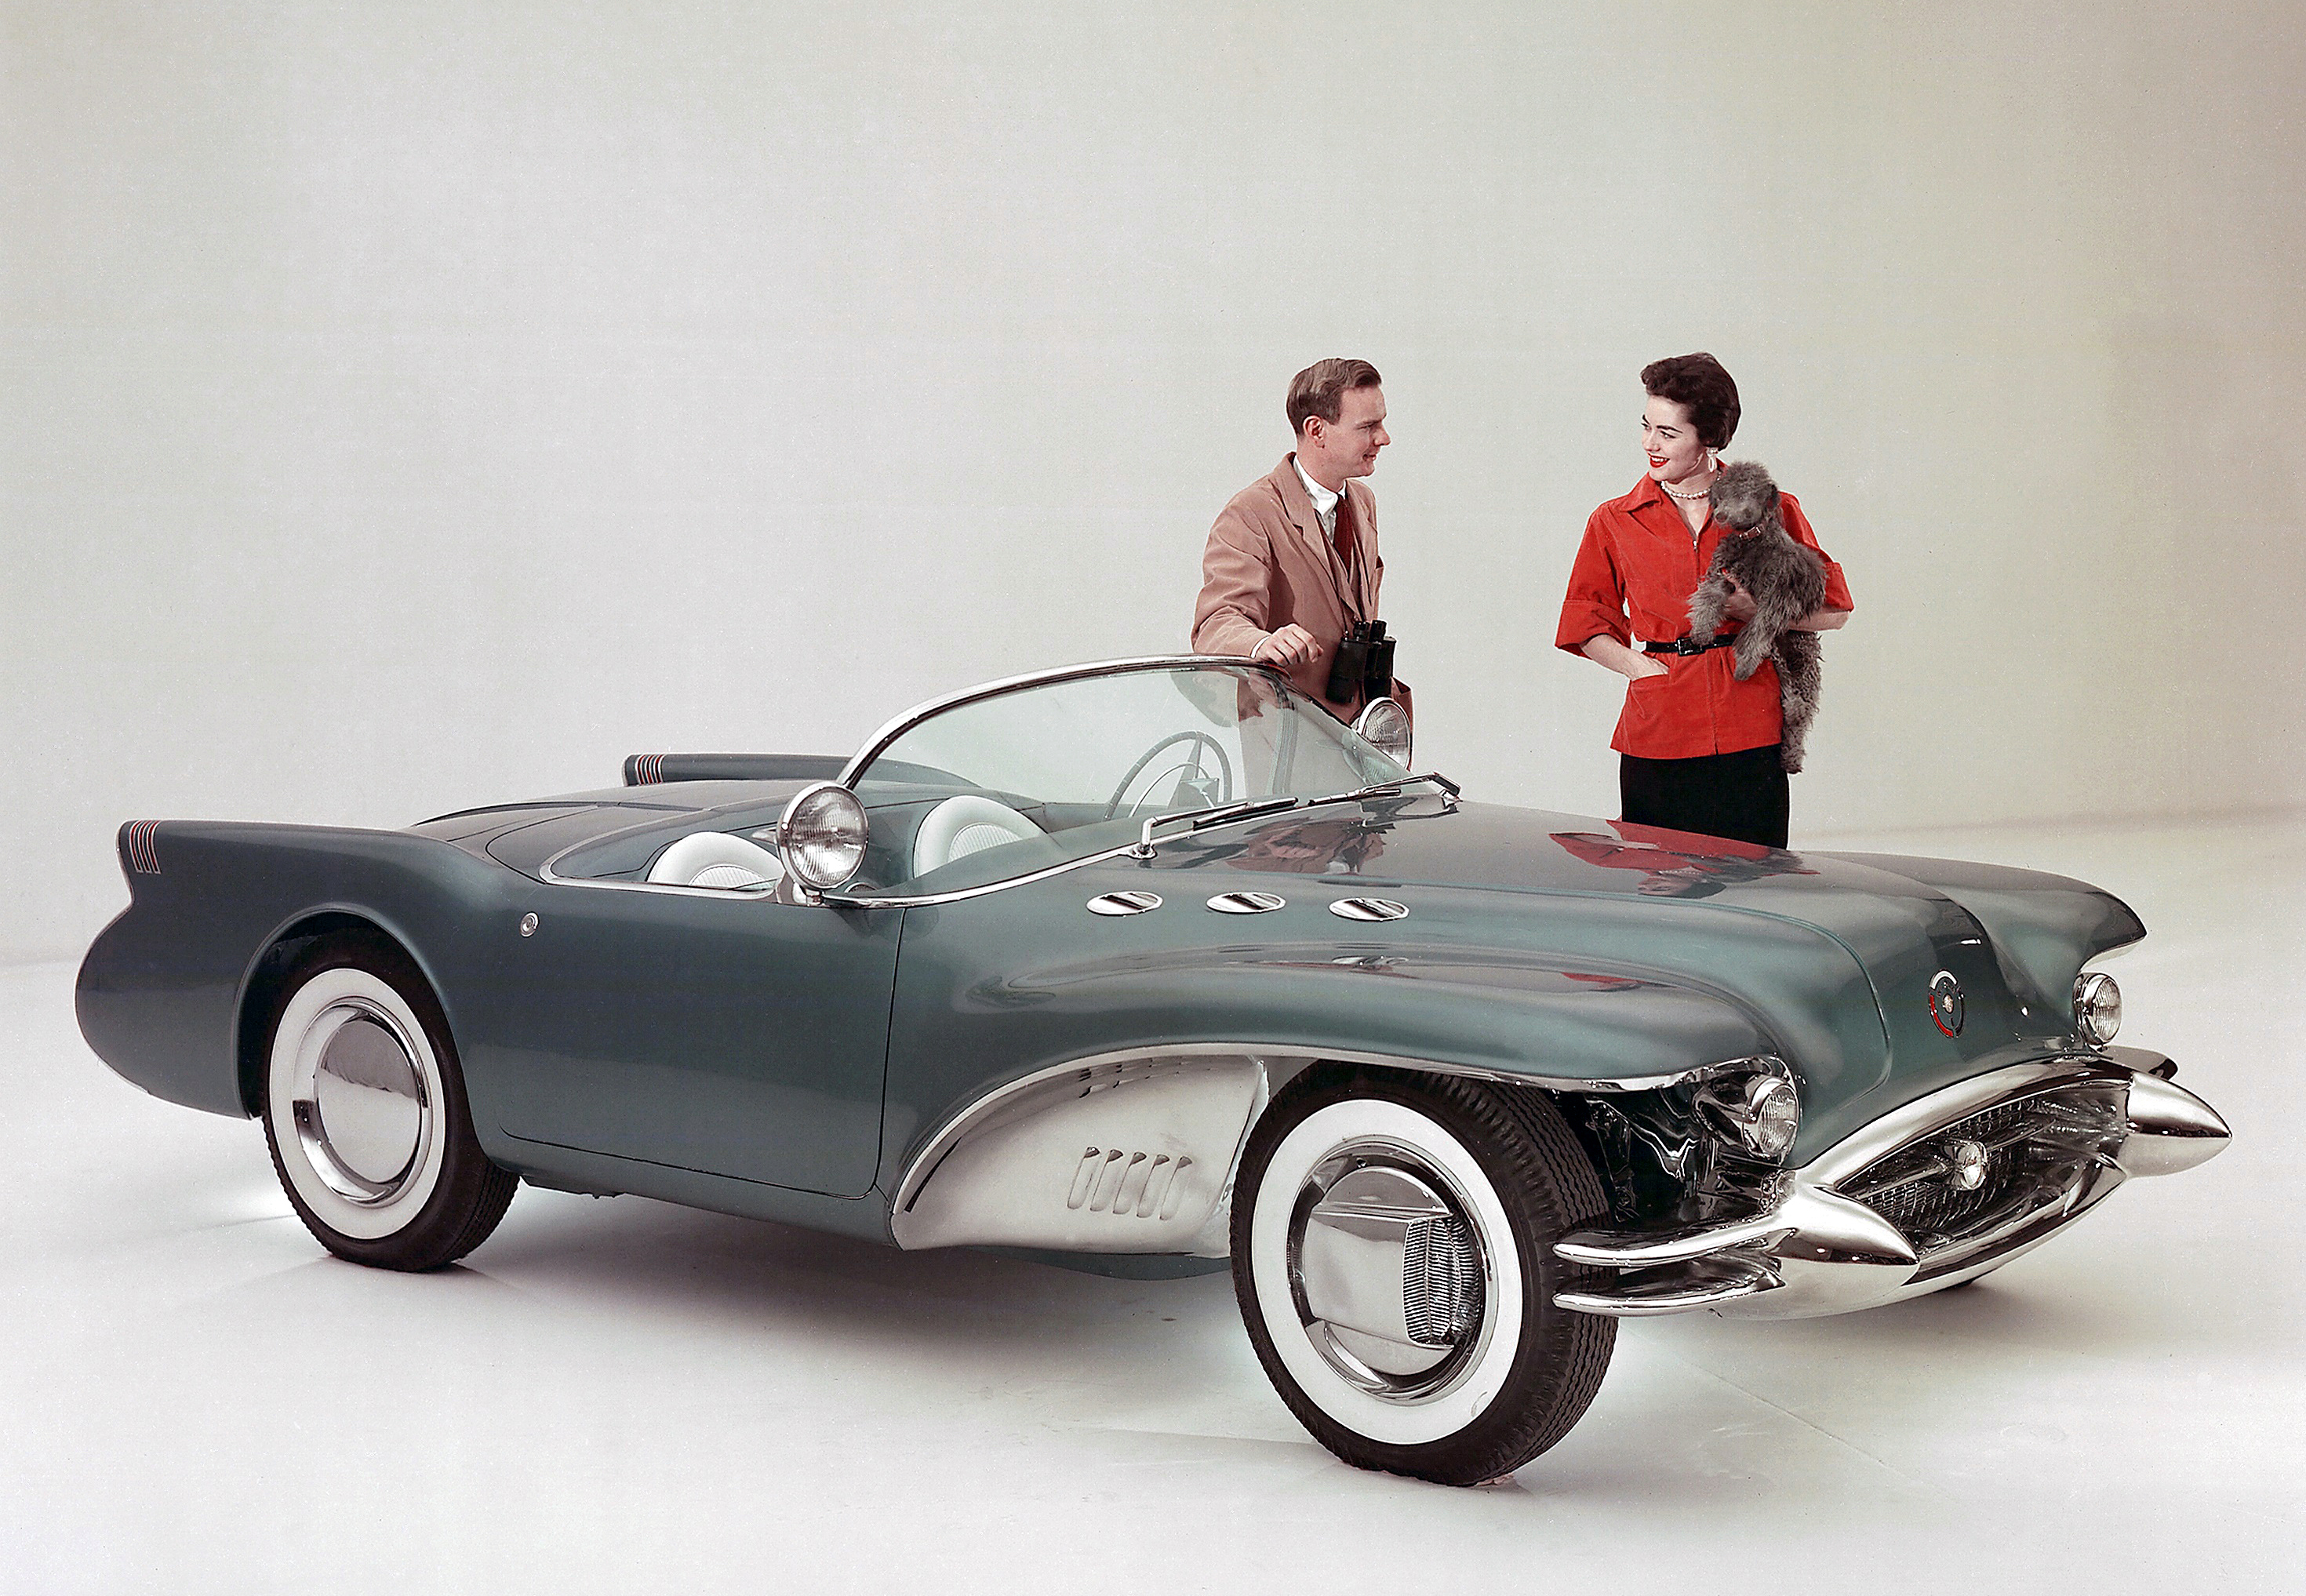 The 1954 Buick Wildcat II concept used a specially modified version of the company’s recently introduced “Nailhead” V-8 engine.